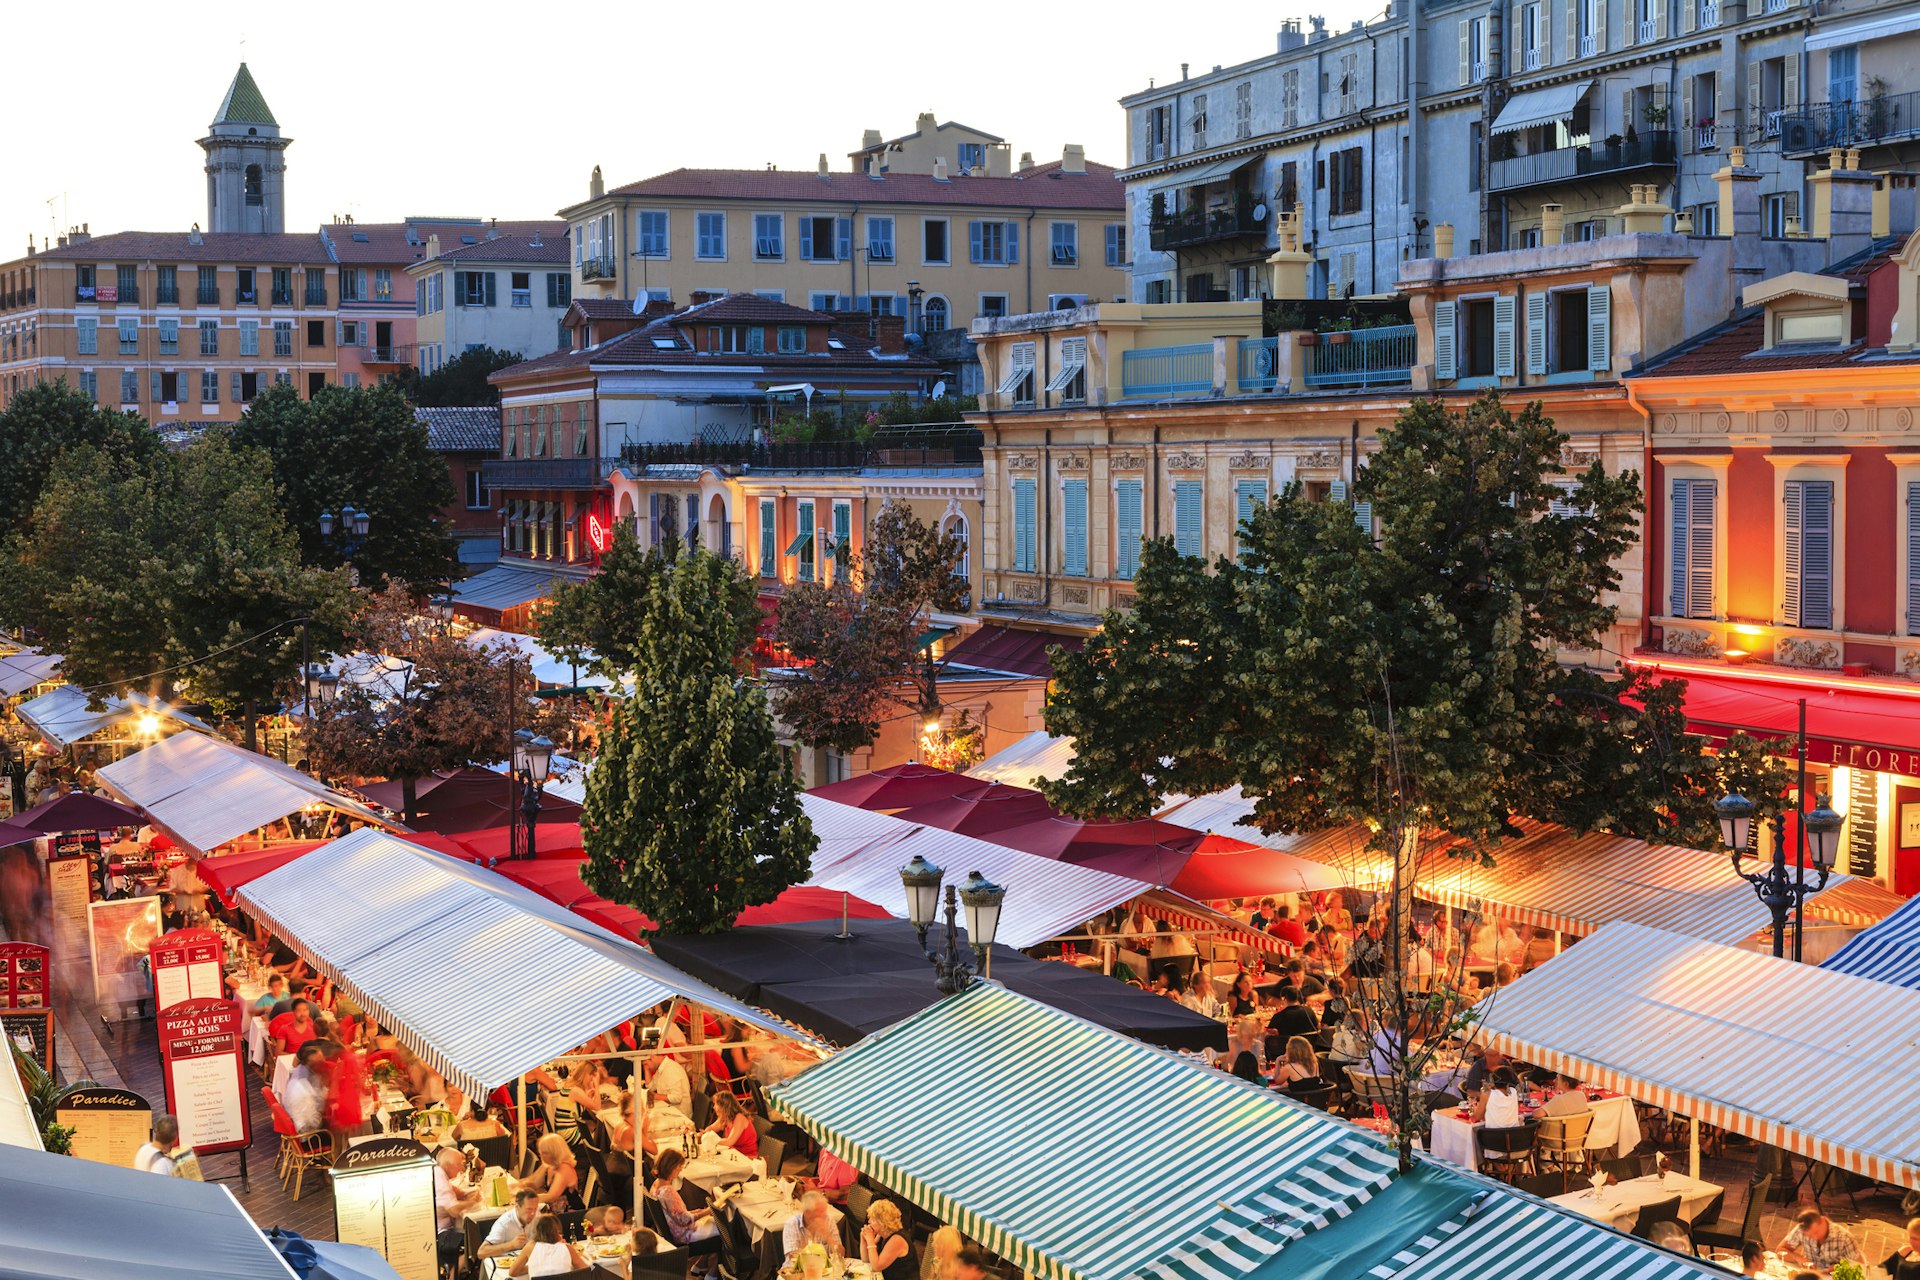 An overhead view of the market stalls of Cours Saleya in Nice at dusk